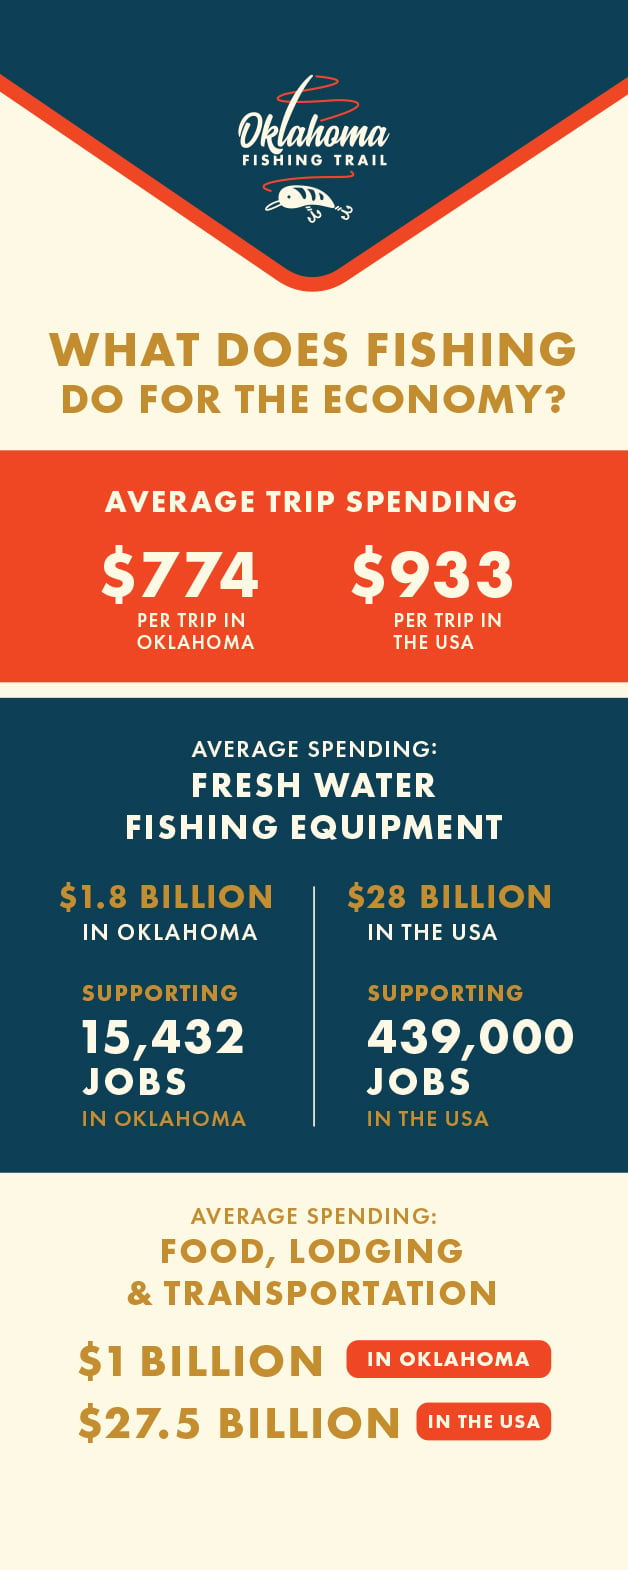 Oklahoma Tourism and Recreation Department – Oklahoma Fishing Trail Campaign